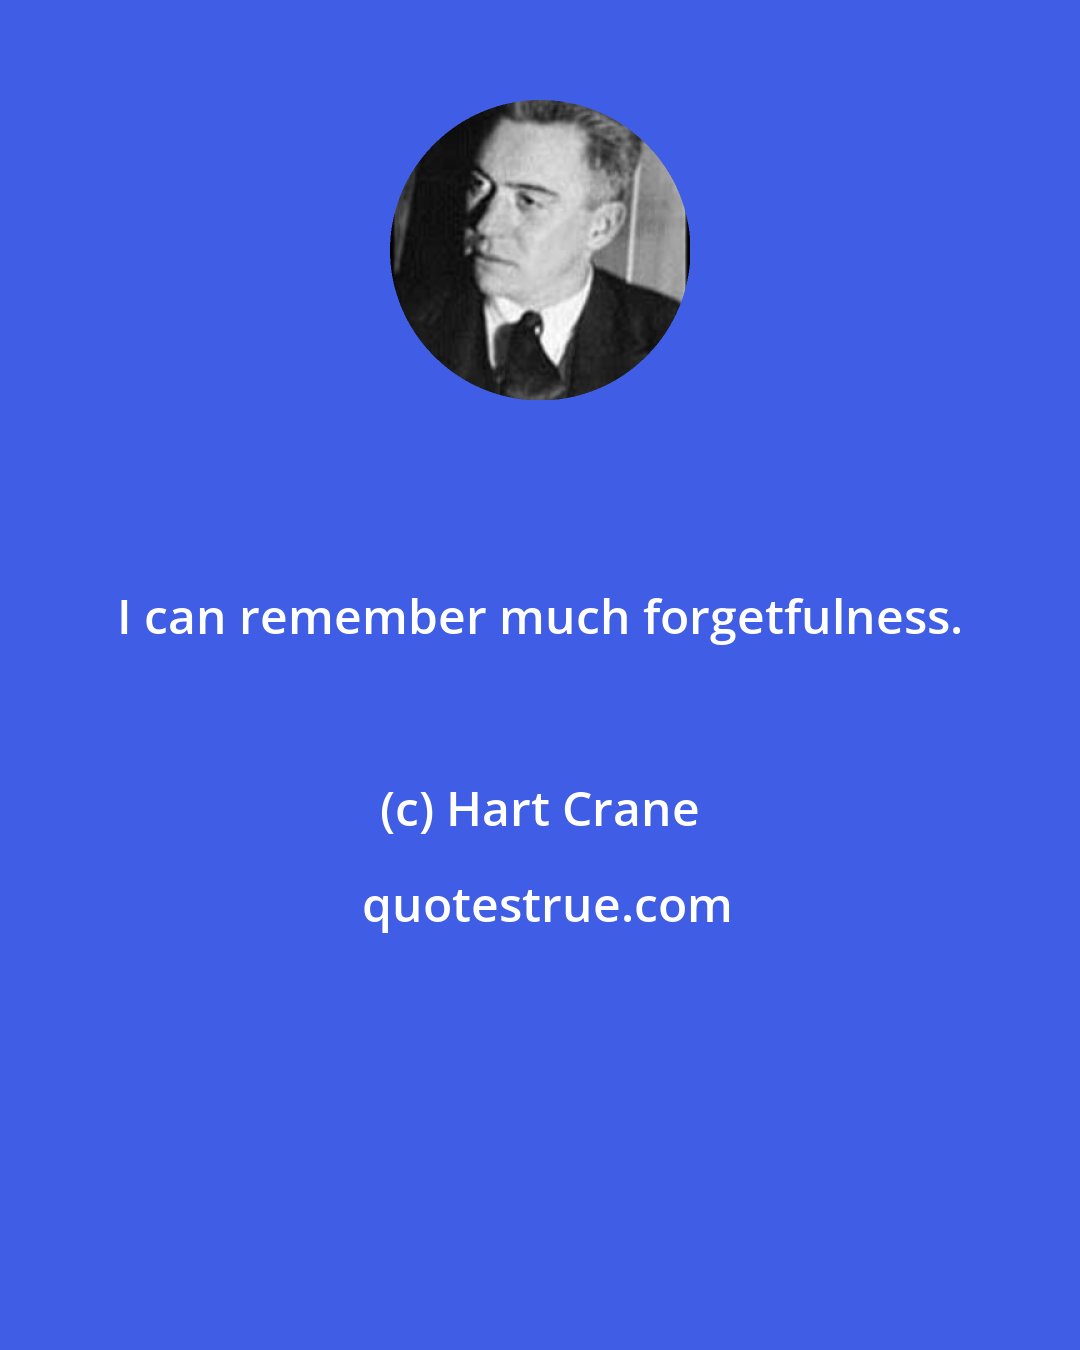 Hart Crane: I can remember much forgetfulness.